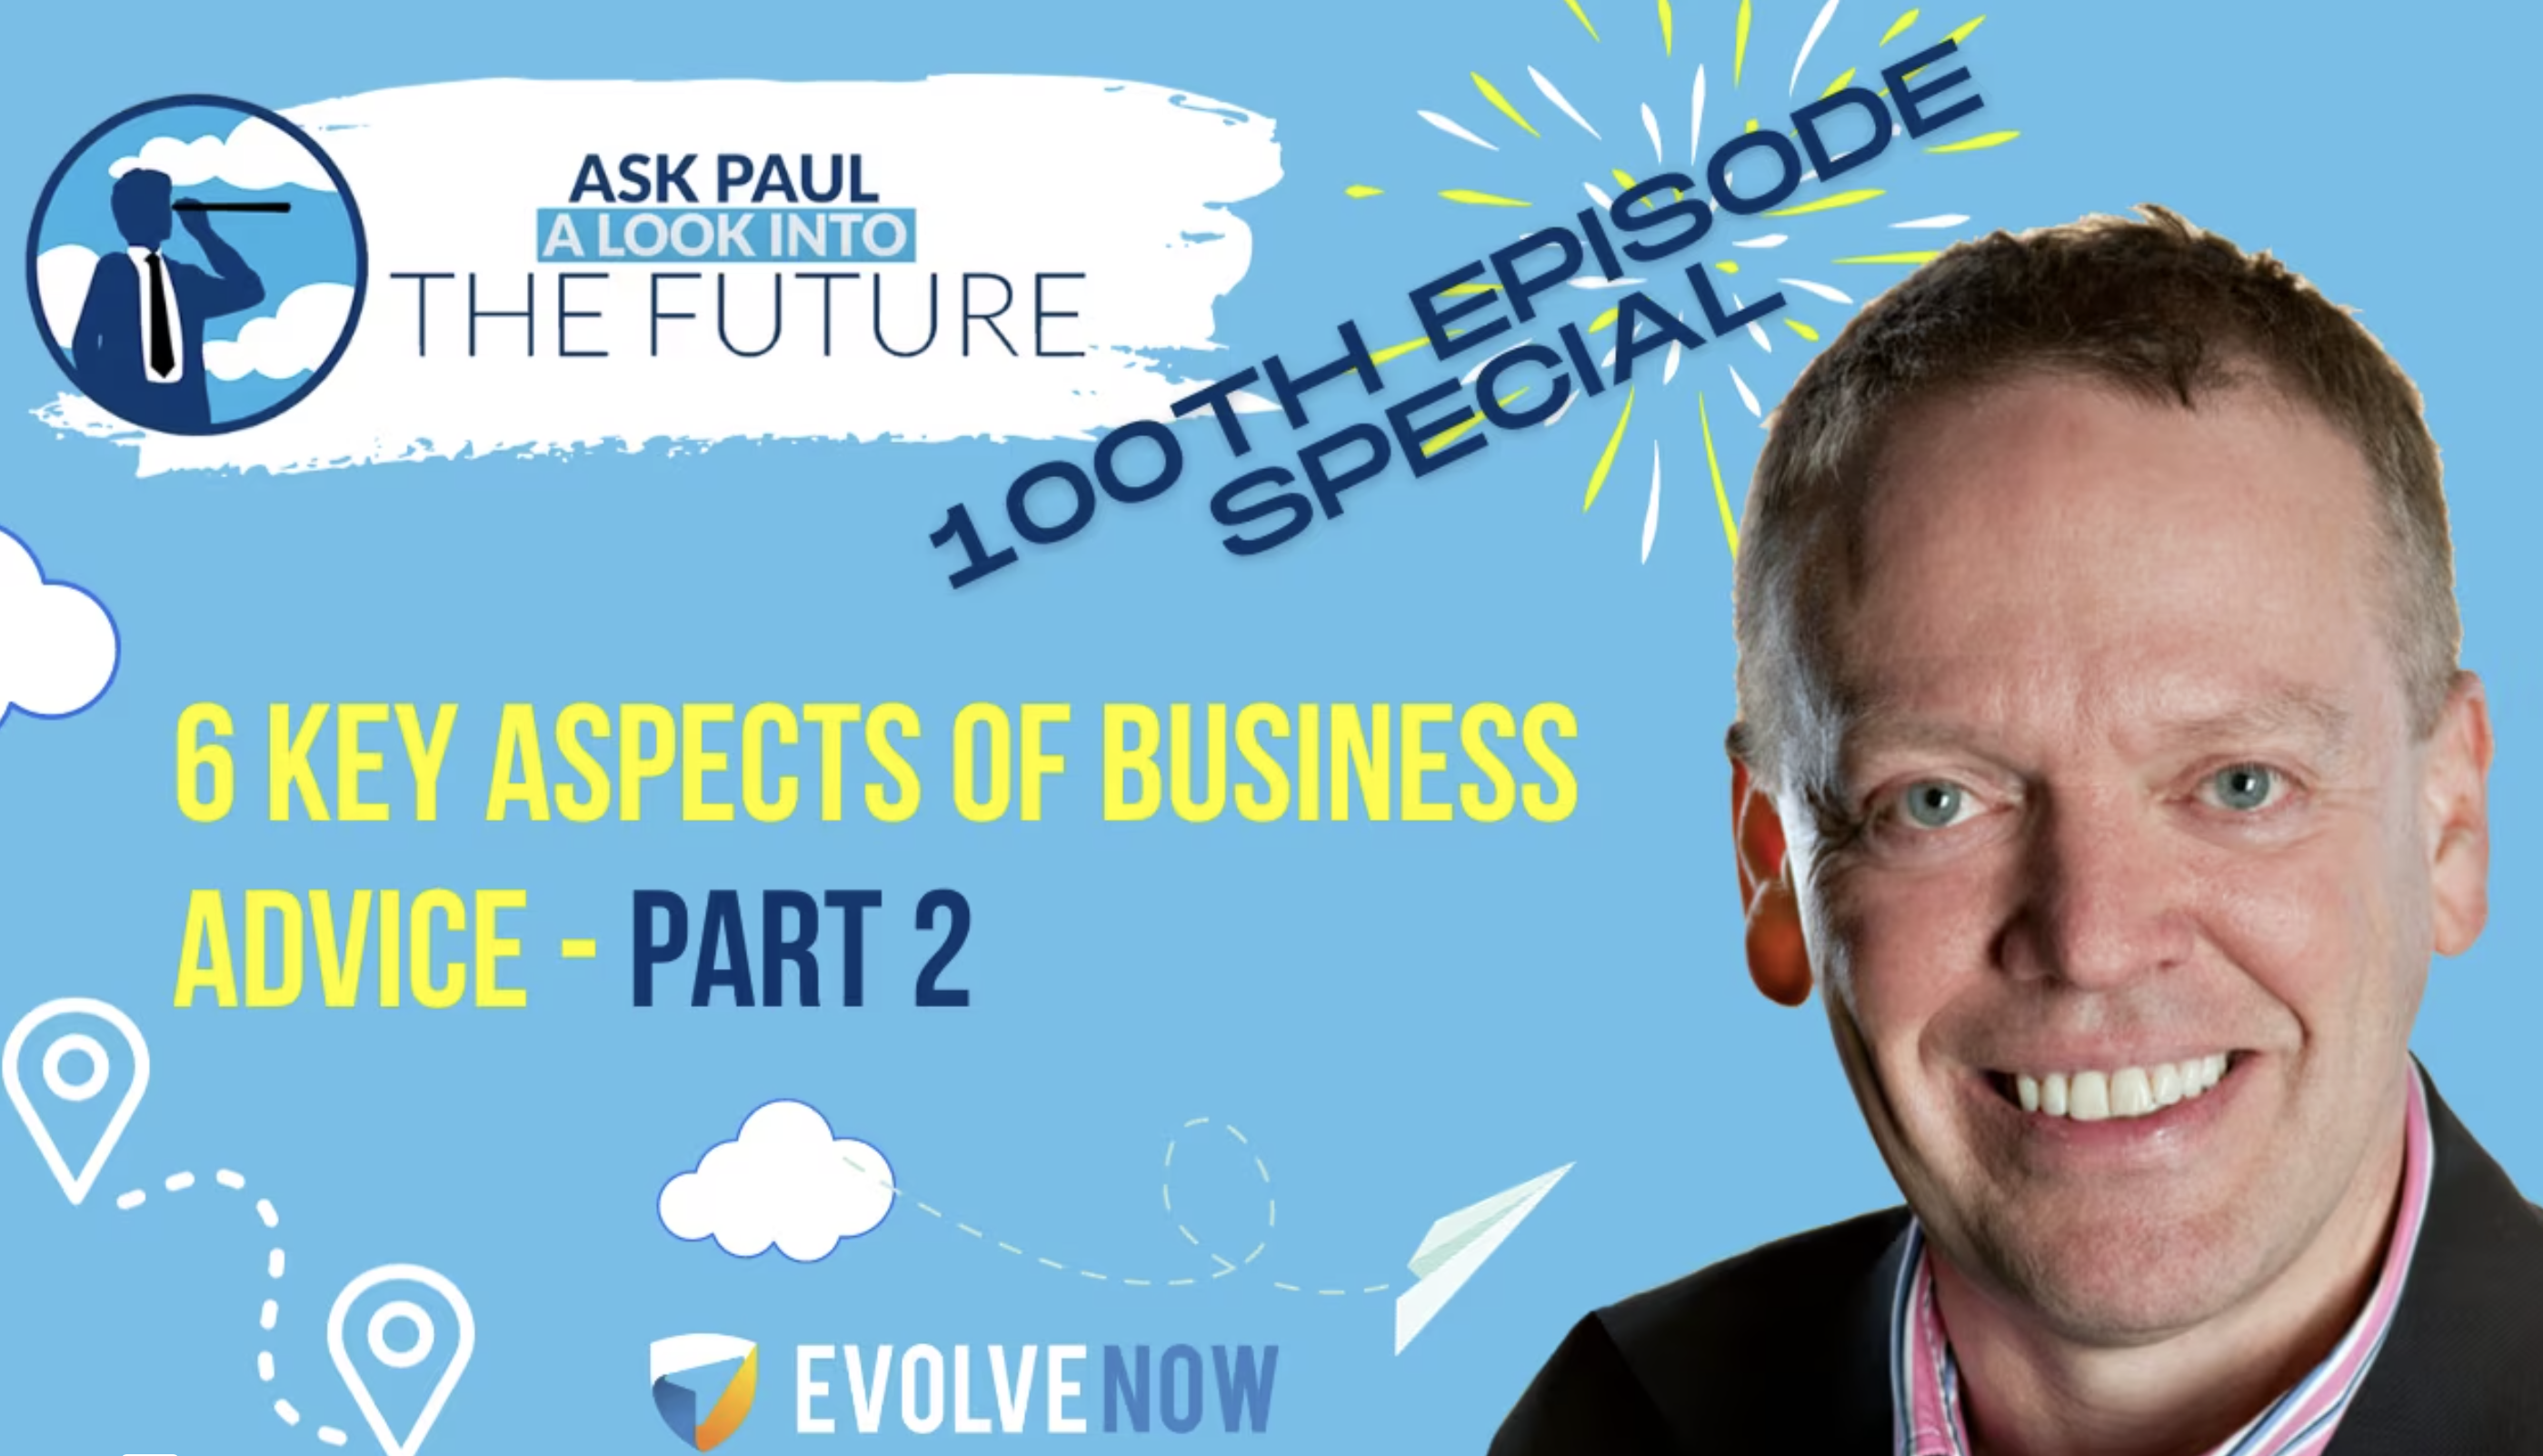 Ask Paul - A Look Into The Future Episode 100: 6 Key Aspects of Business Advice - Part 2